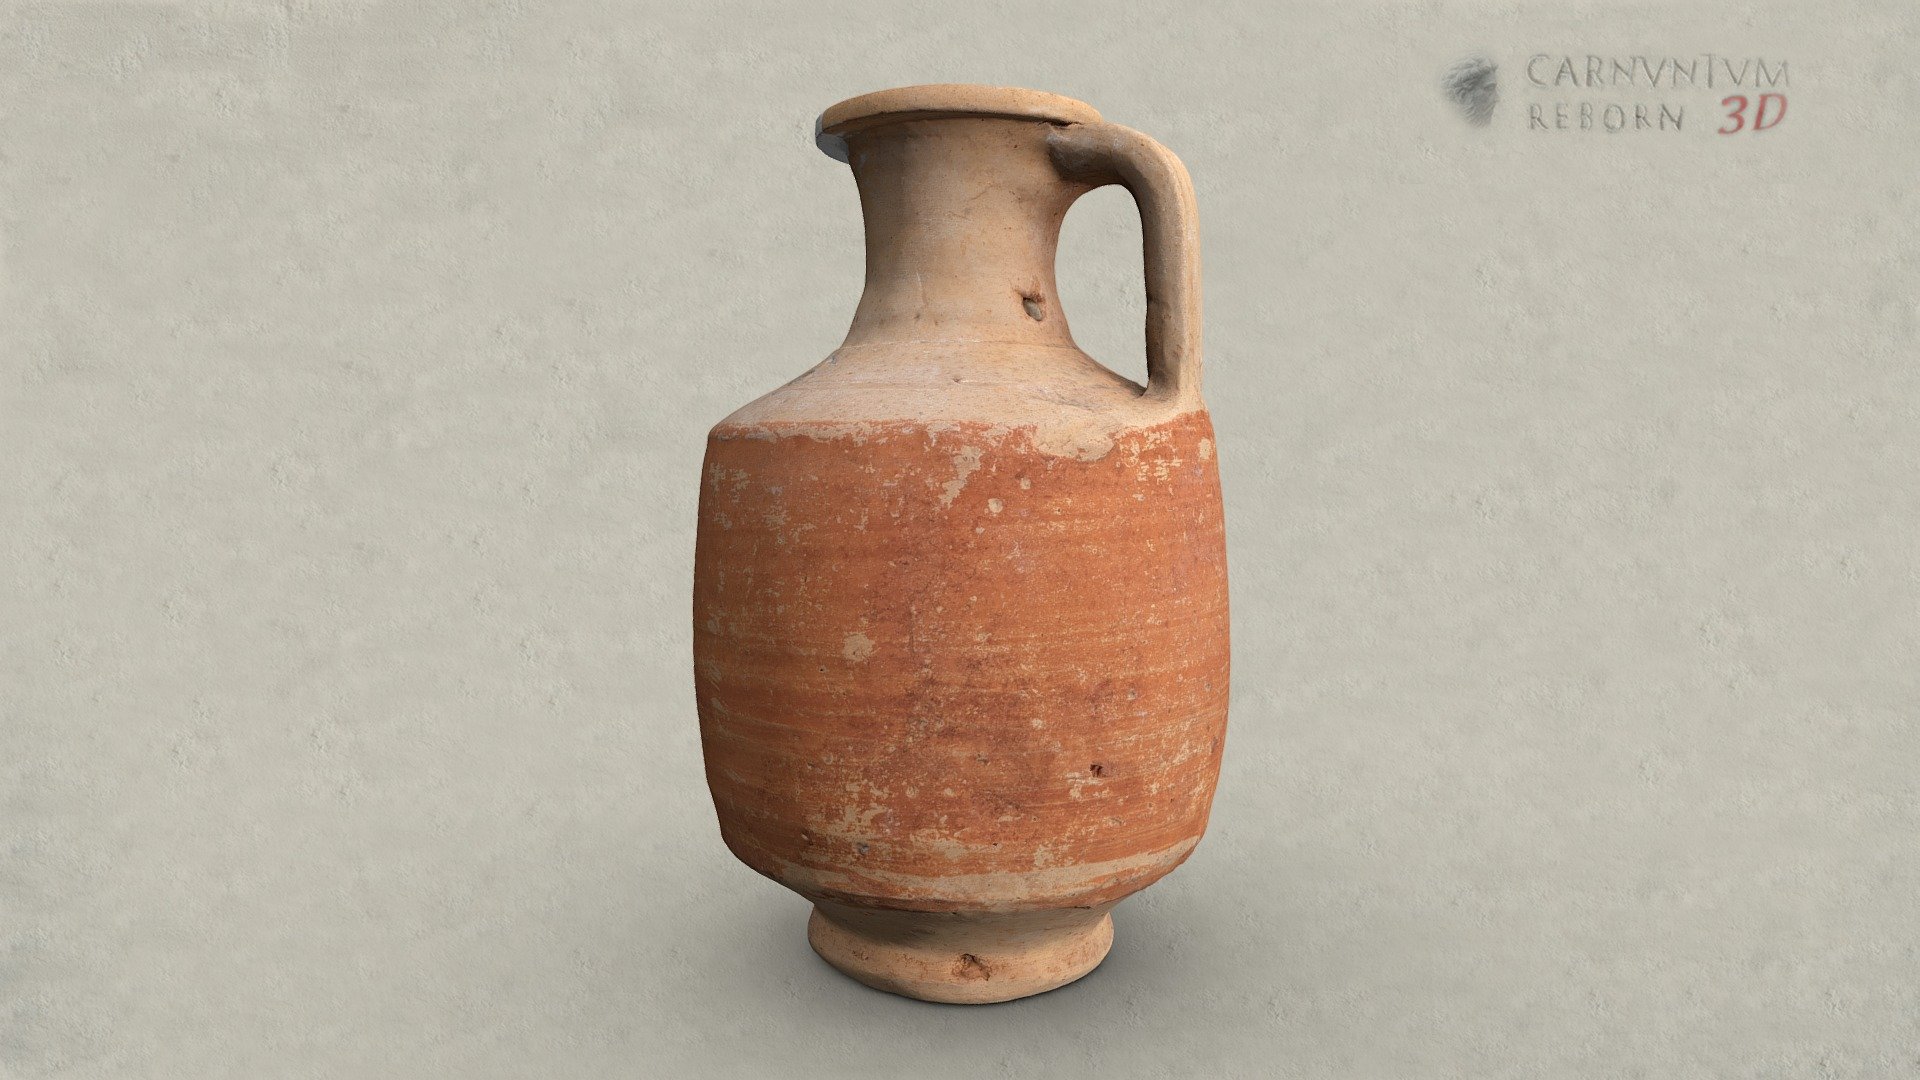 Roman jug with cylindrical body, horizontal rim and a double grooved band handle. The bottom is set off from the body of the jar. A red coating was applied to the body. Part of the rim completed. Ceramic; h 17,9 cm; 2nd century AD.

Model: © Landessammlungen Niederösterreich, Niederösterreich 3D - Krug - 3D model by noe-3d.at (@www.noe-3d.at) 3d model